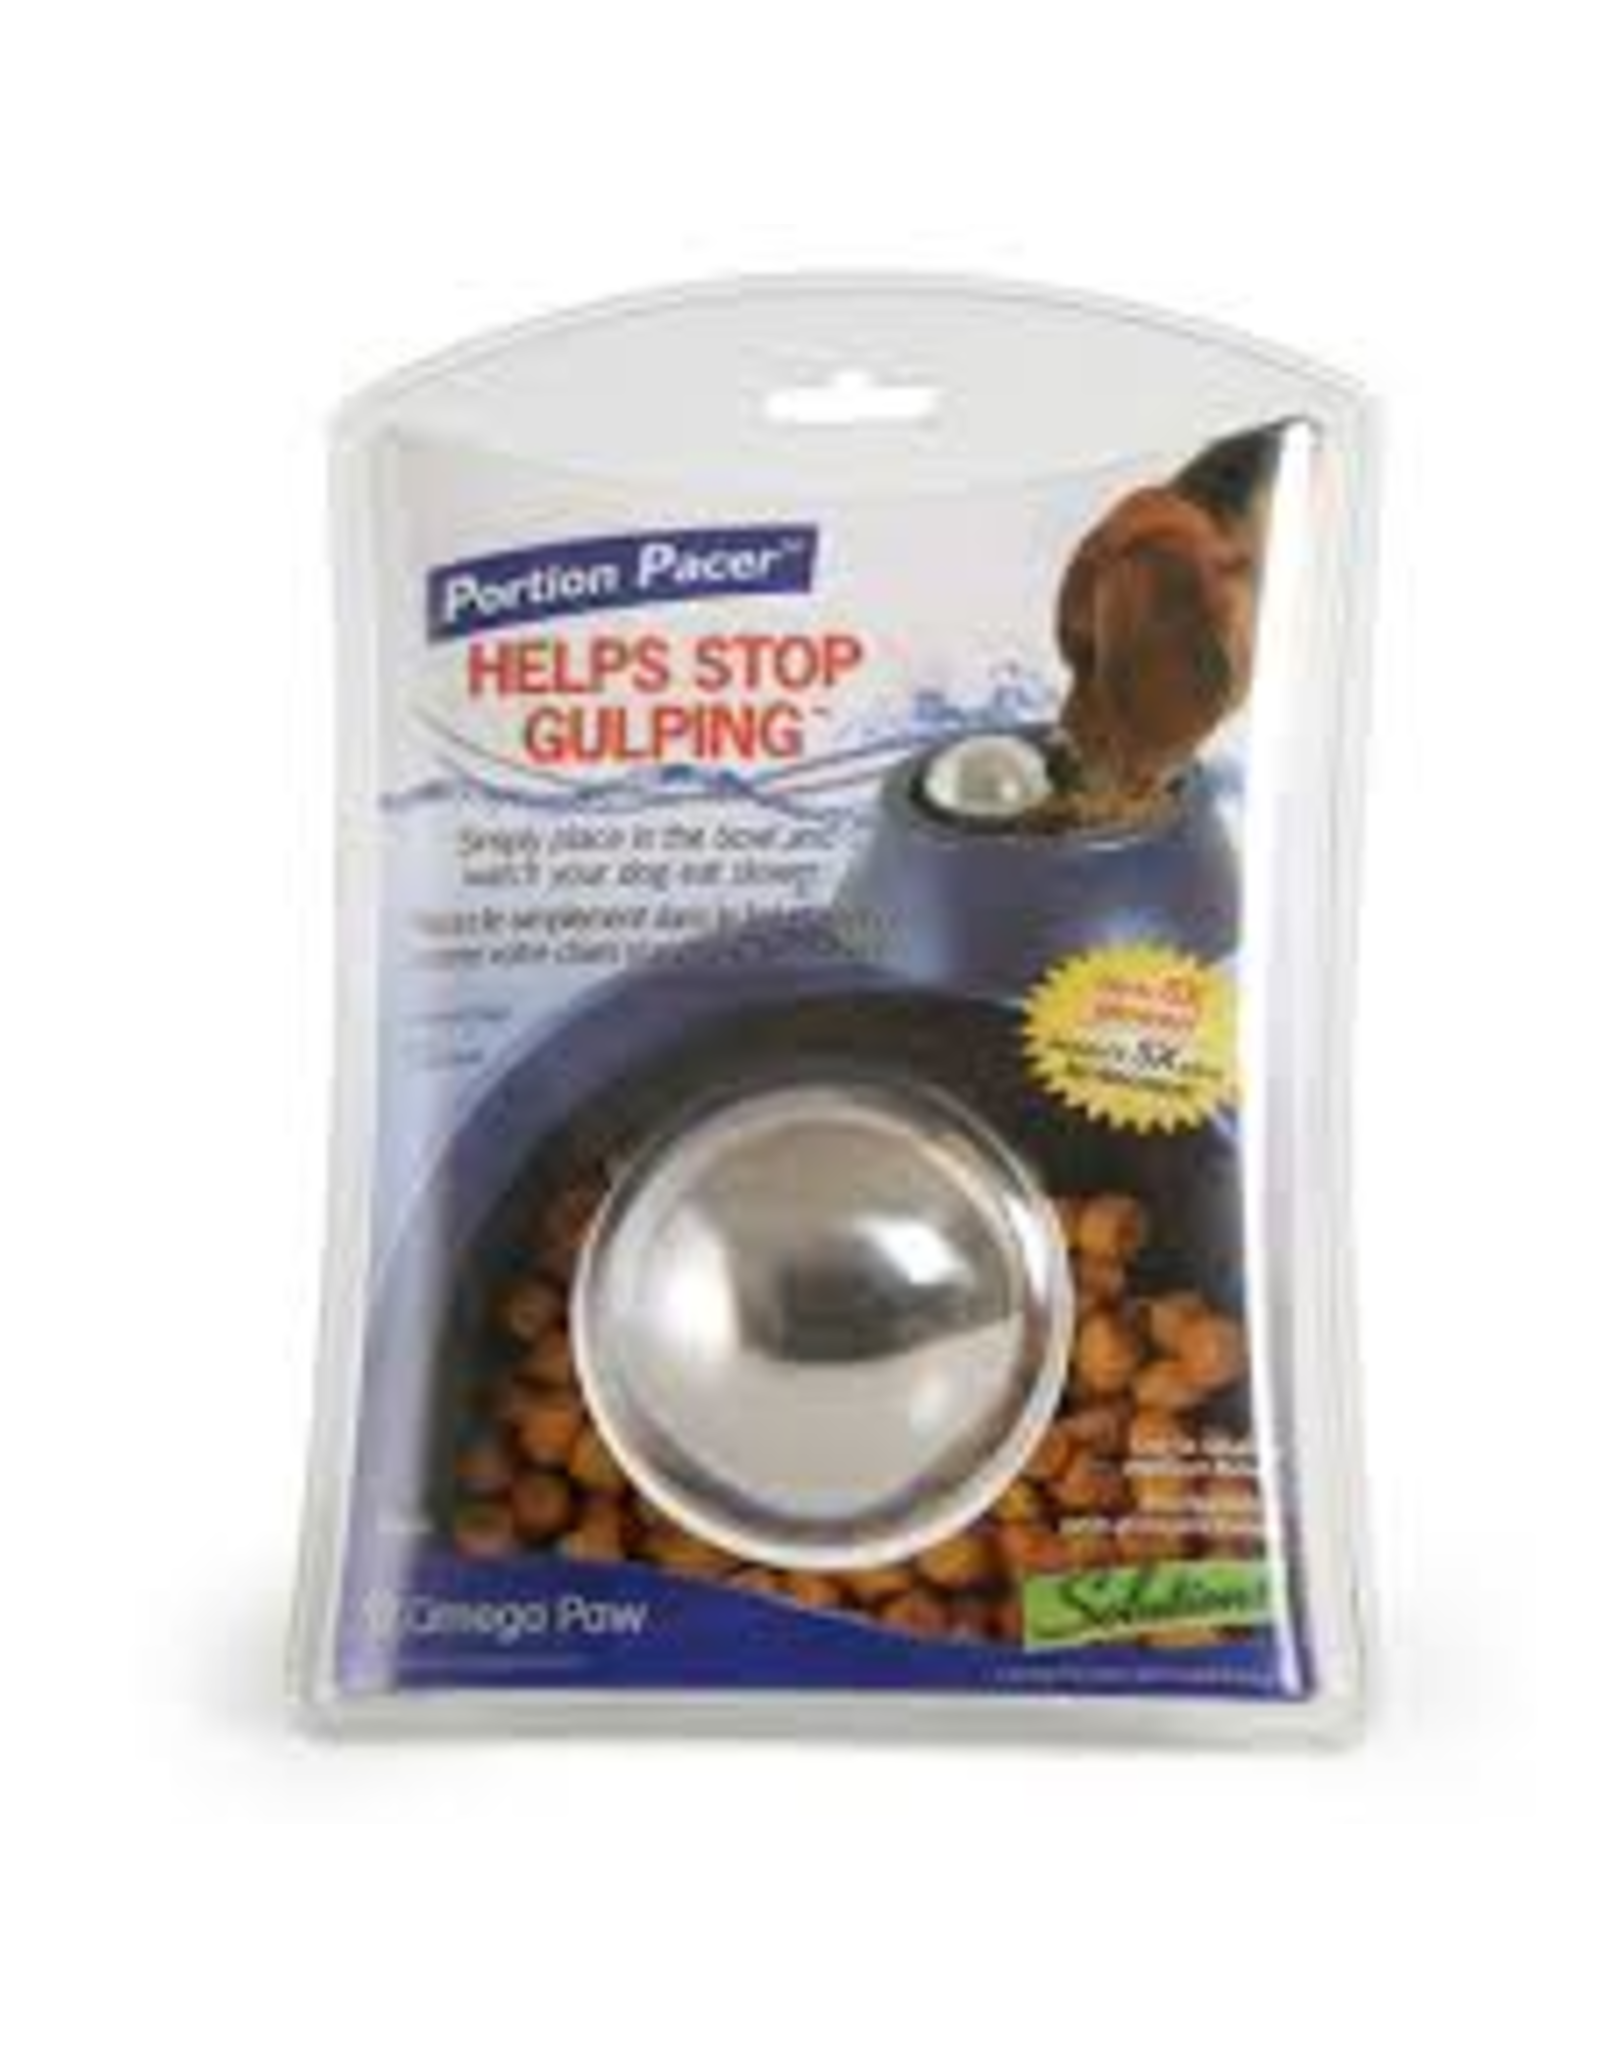 Omega Paw Omega Paw Boule stainless S